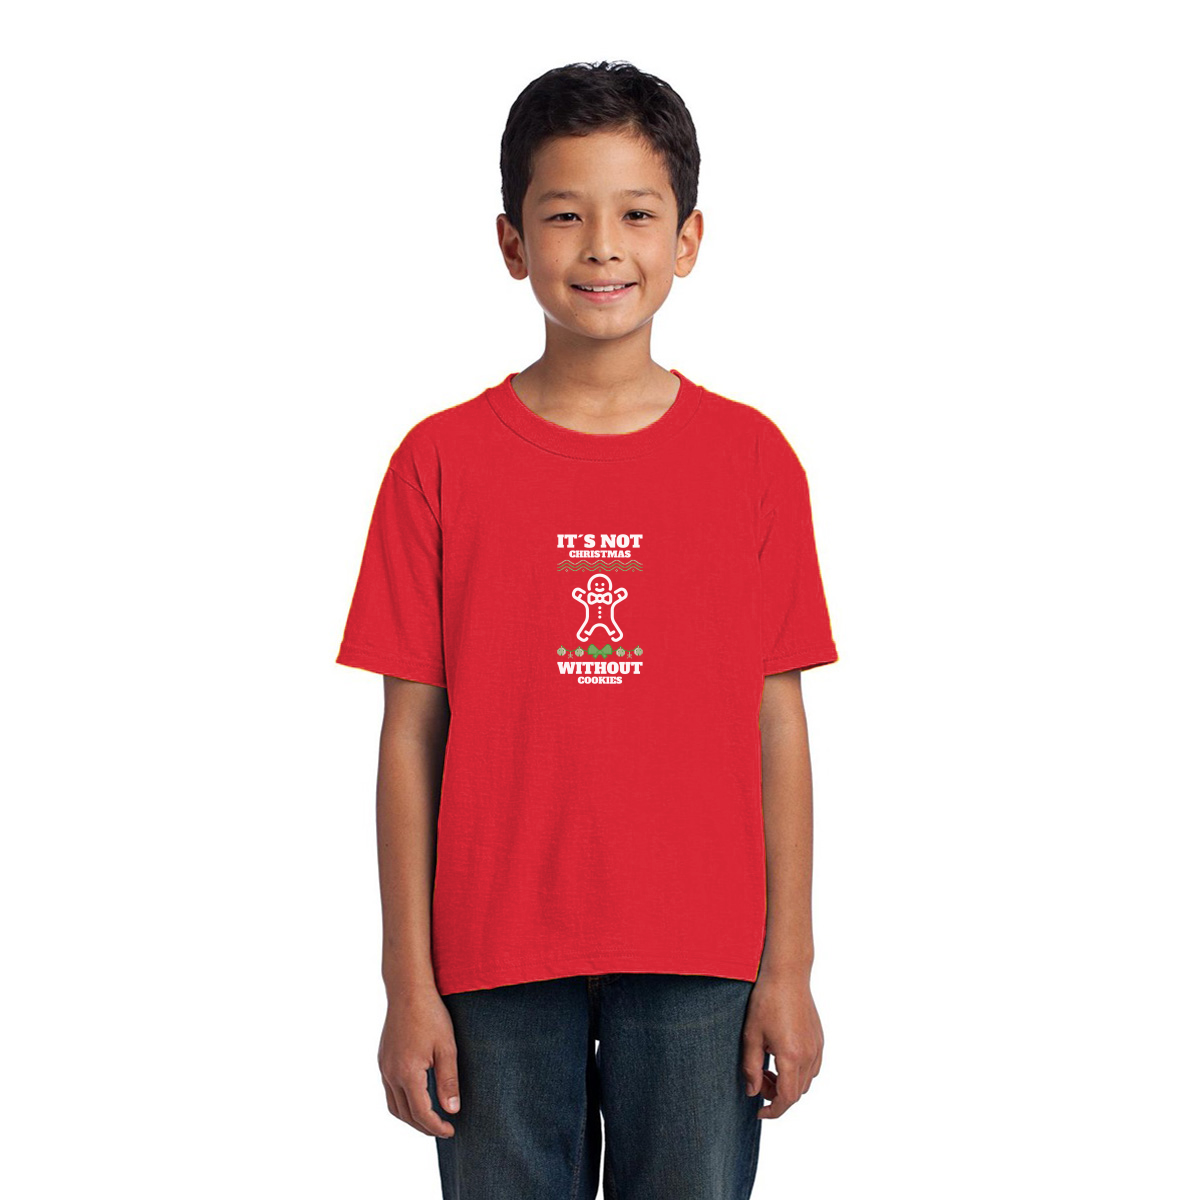 It's Not Christmas Without Cookies Kids T-shirt | Red